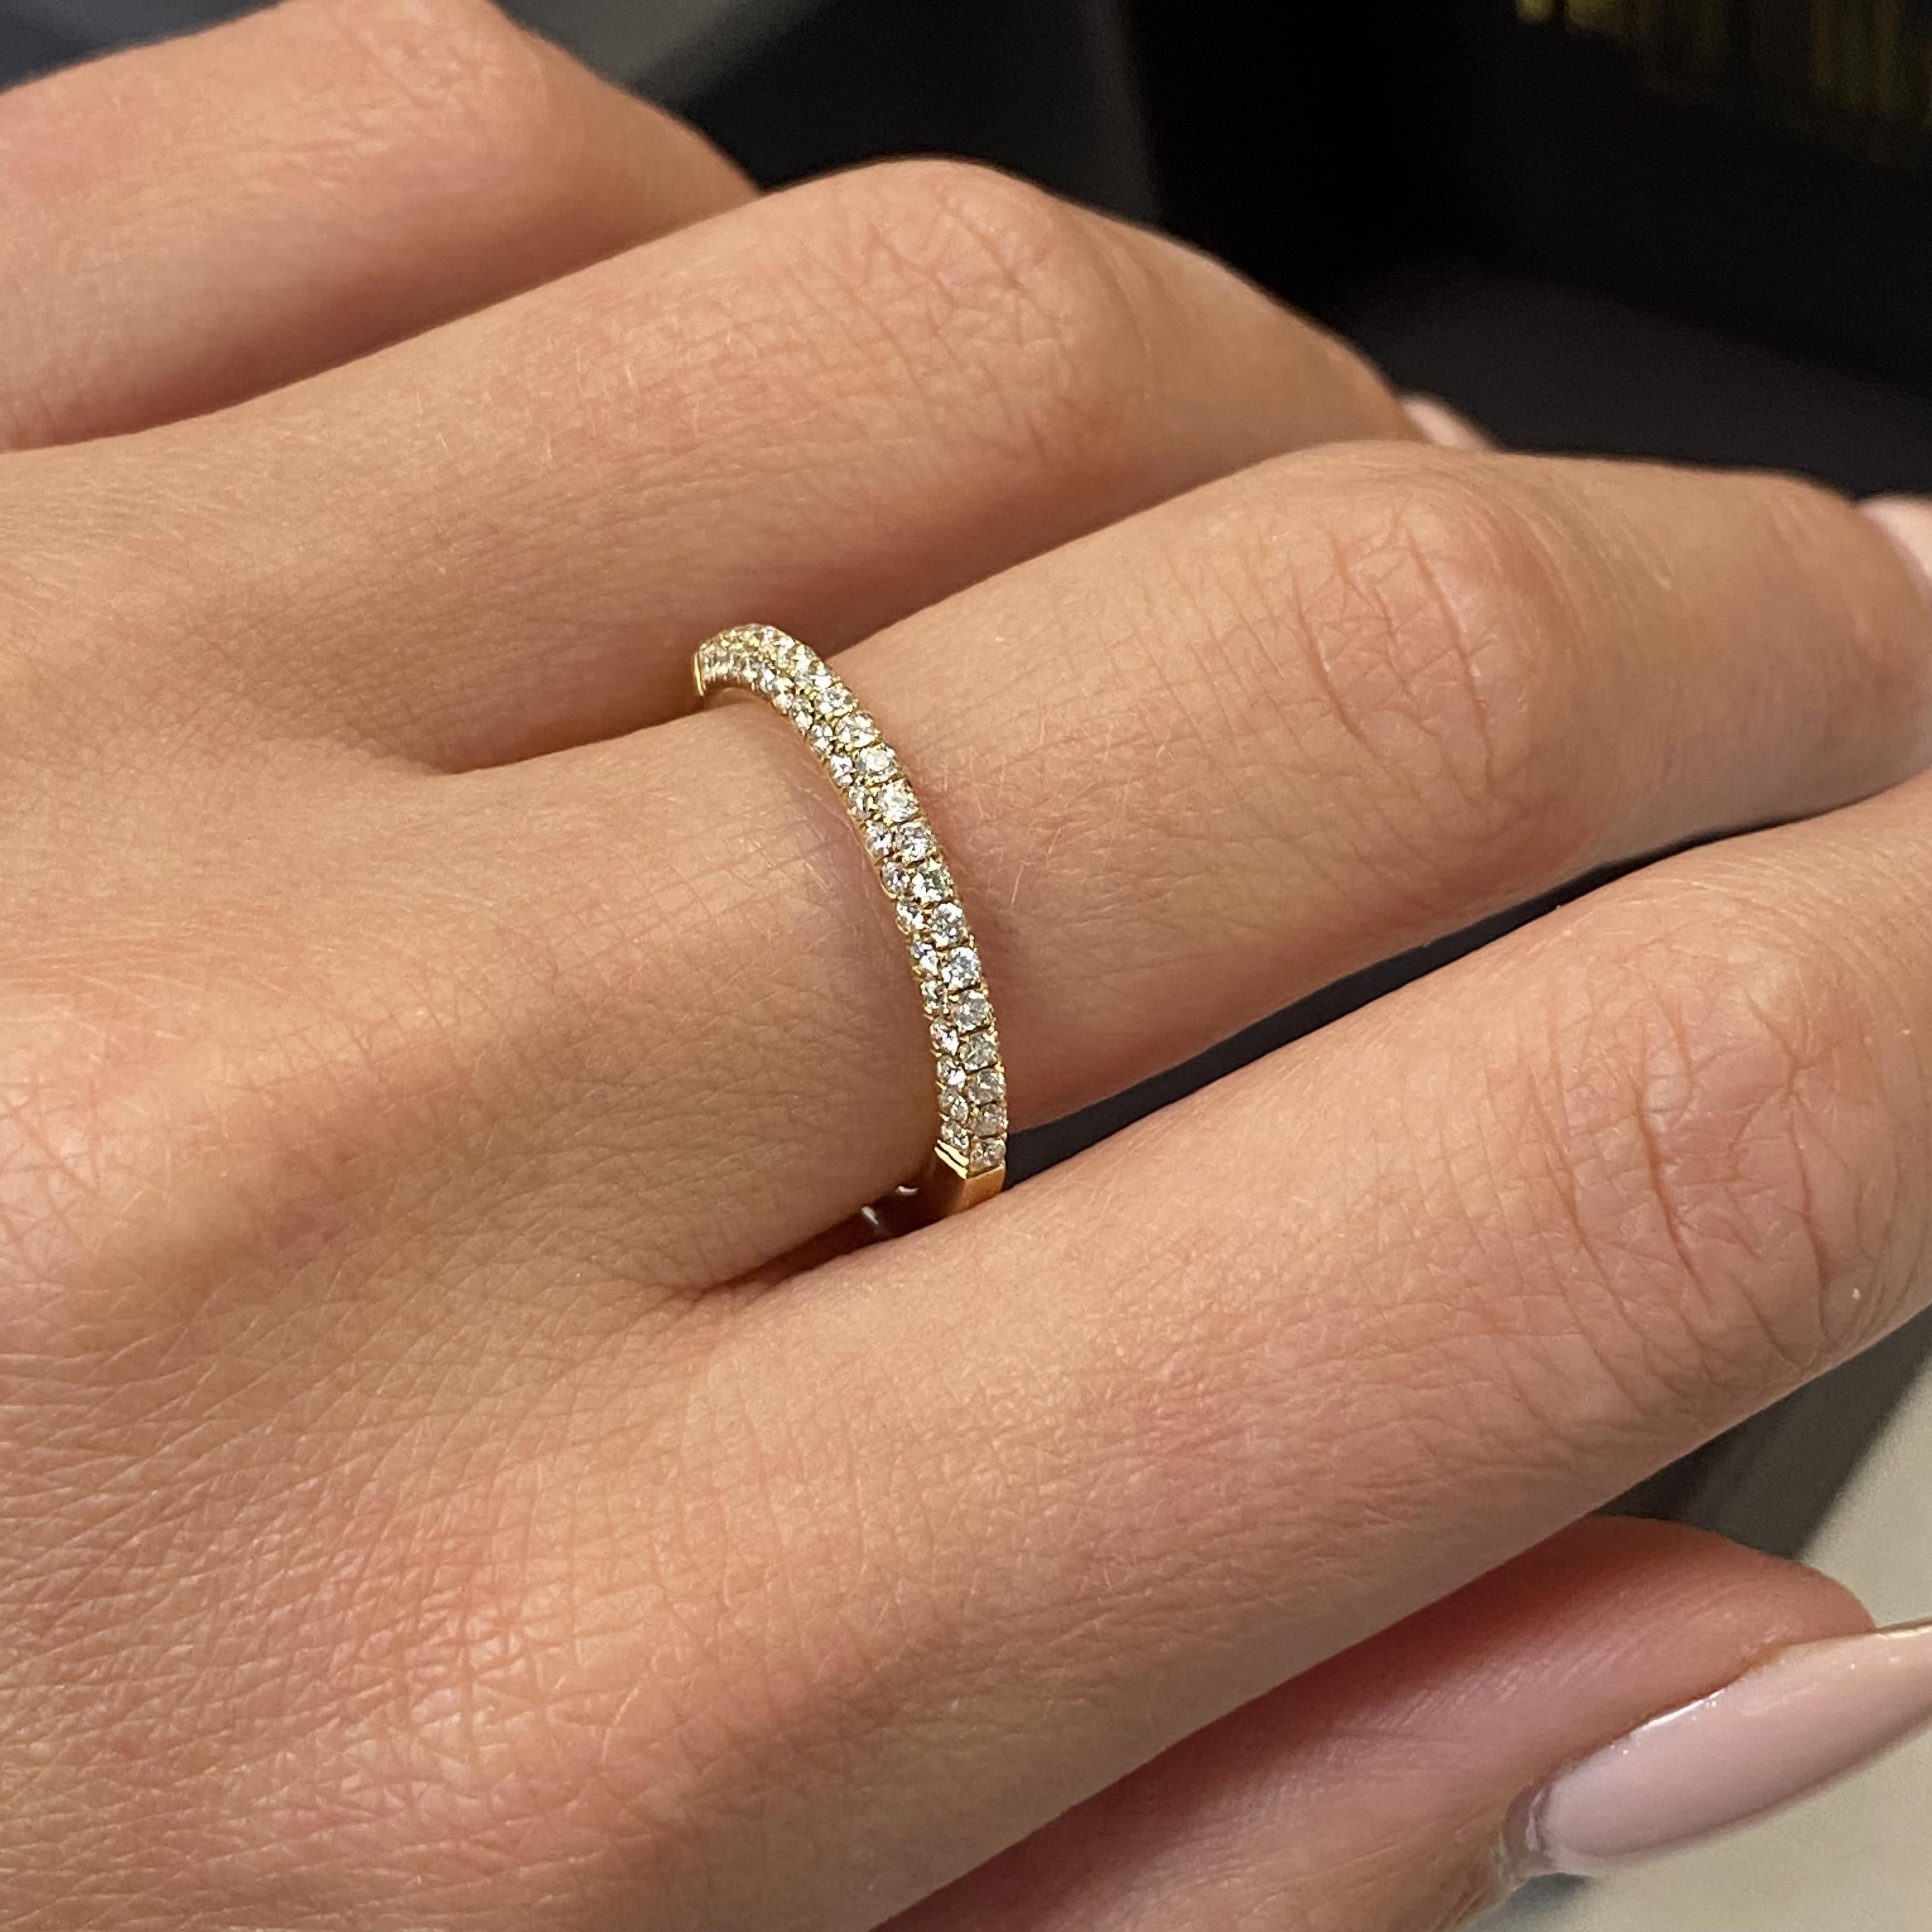 Piero Milano Natural Pave Diamond Wedding Band 18k Yellow Gold 0.44cttw In New Condition For Sale In New York, NY